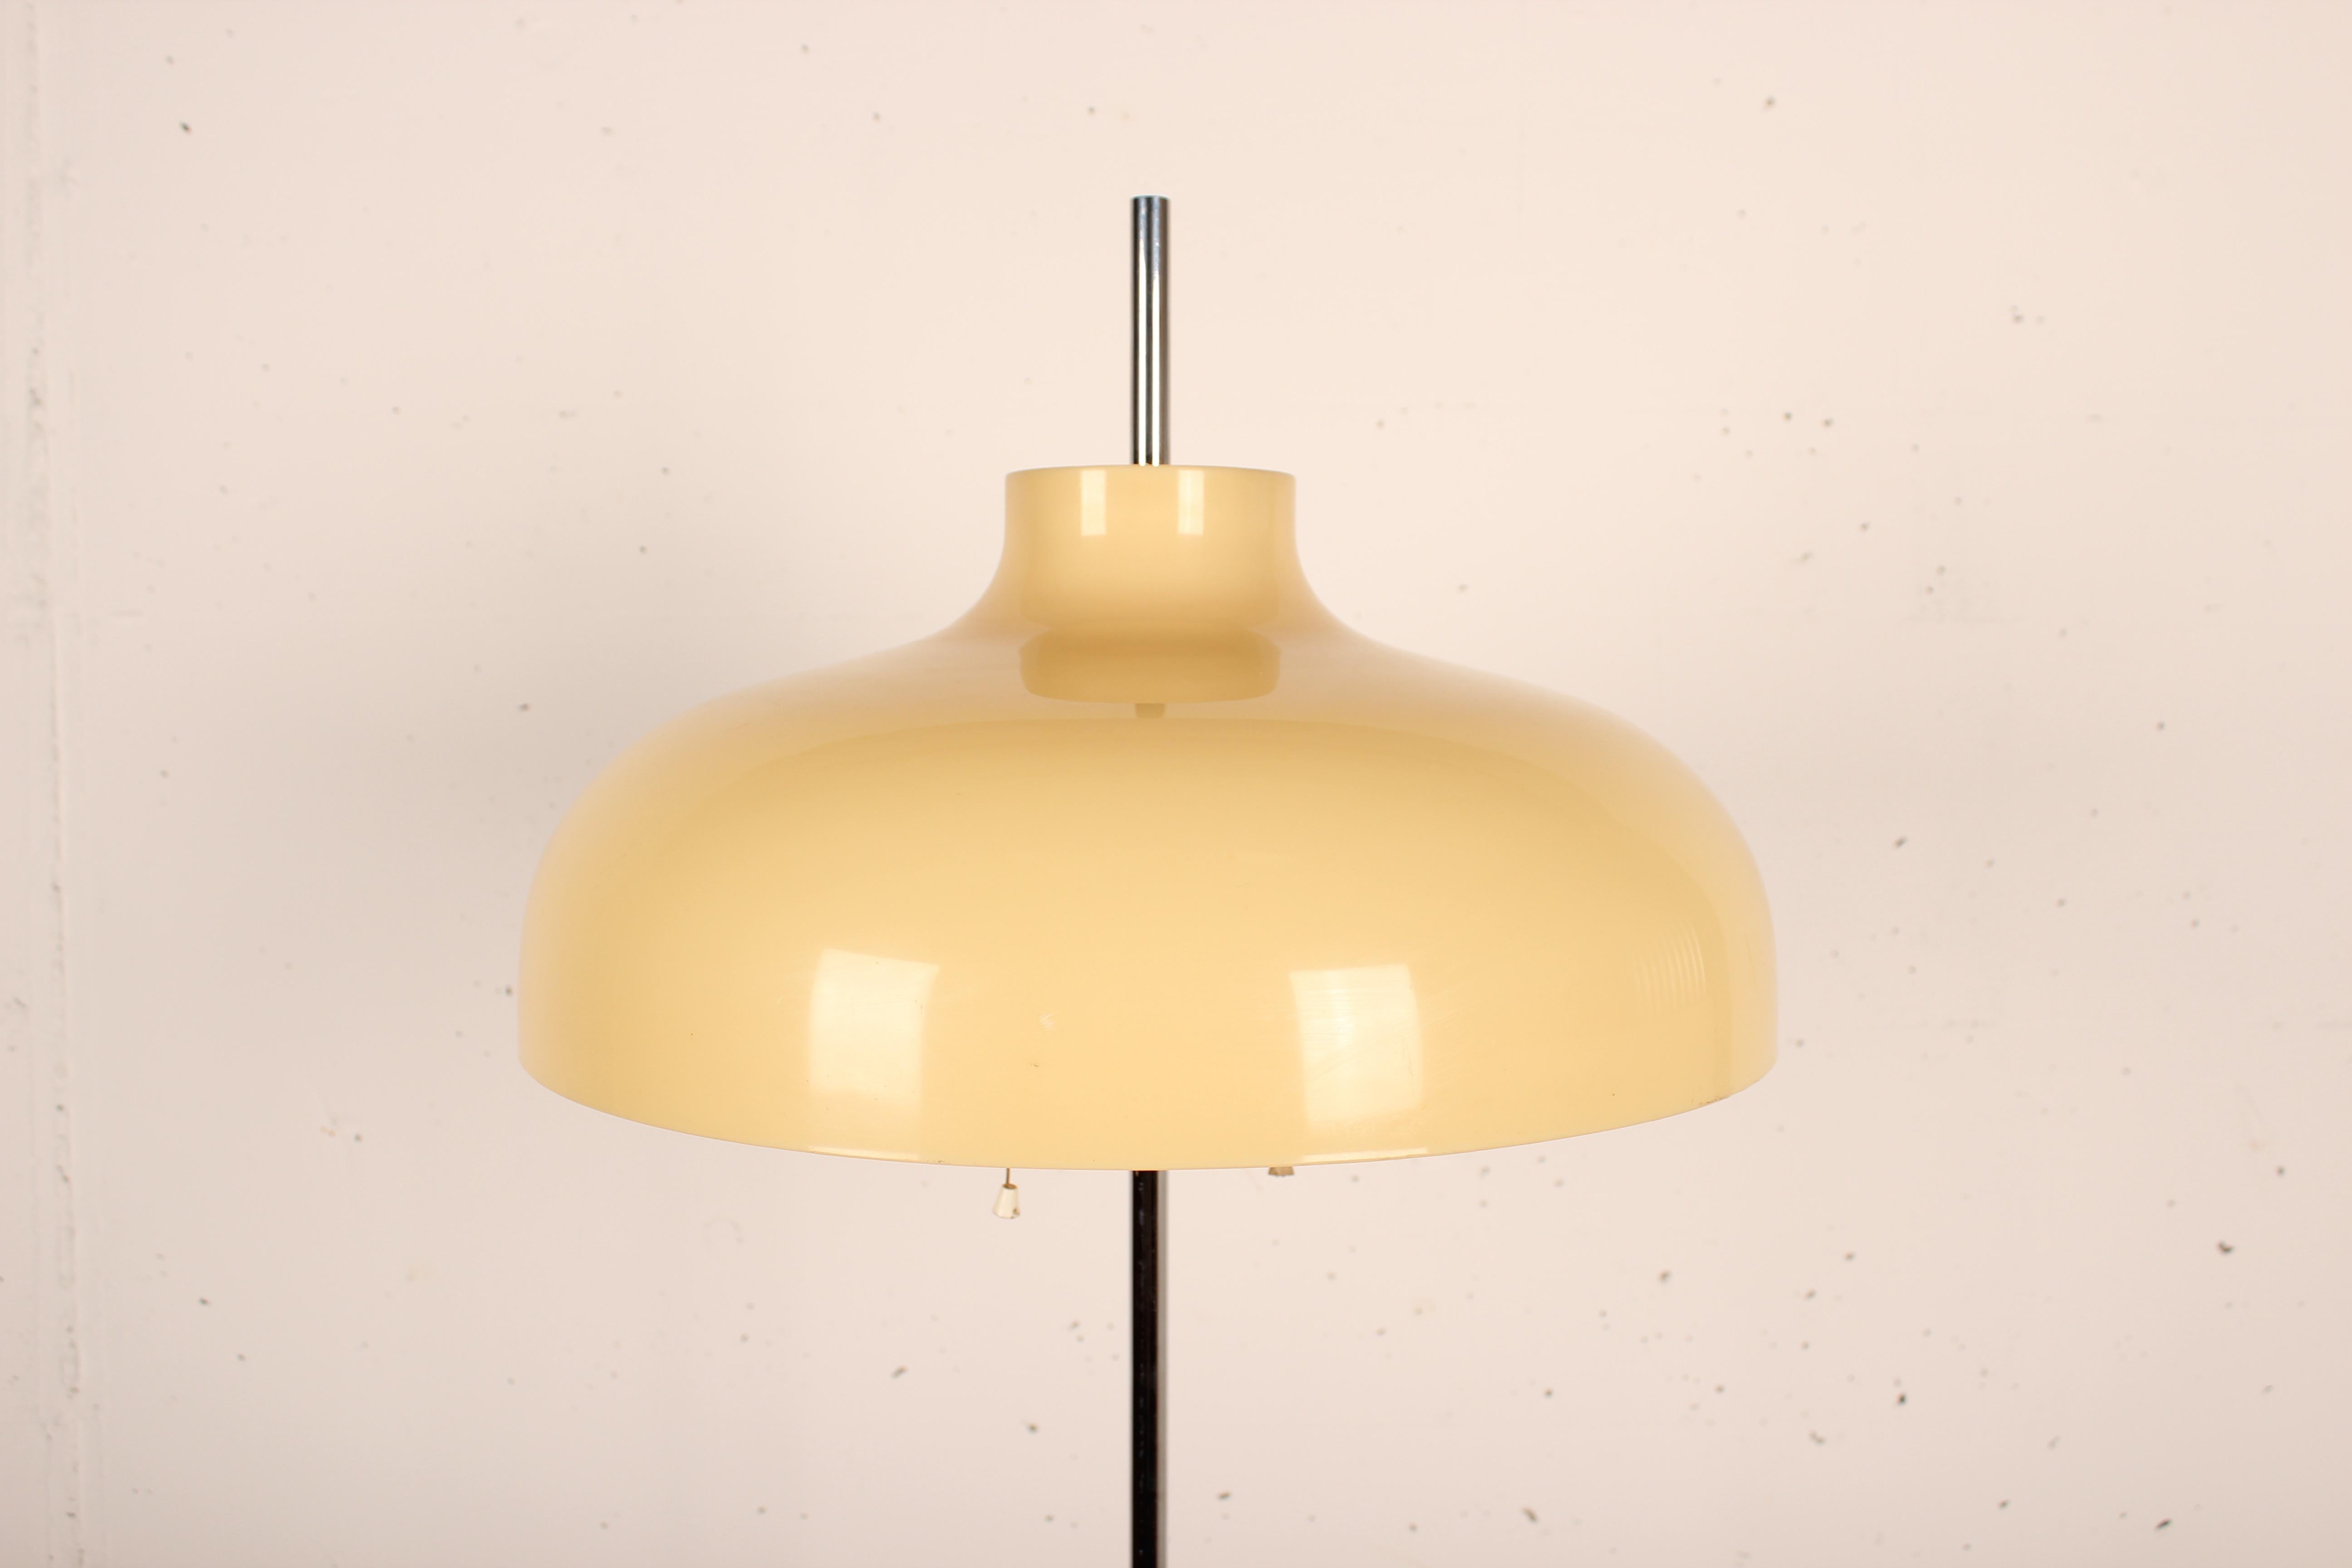 Stunning Mushroom floor lamp with tulip base designed by Joan Antoni Blanc for Tramo the Miguel Milá company, Spain 1968
White lacquered metal base. Chrome steel neck and methacrylate shade. Variable height.
Good condition, electrification